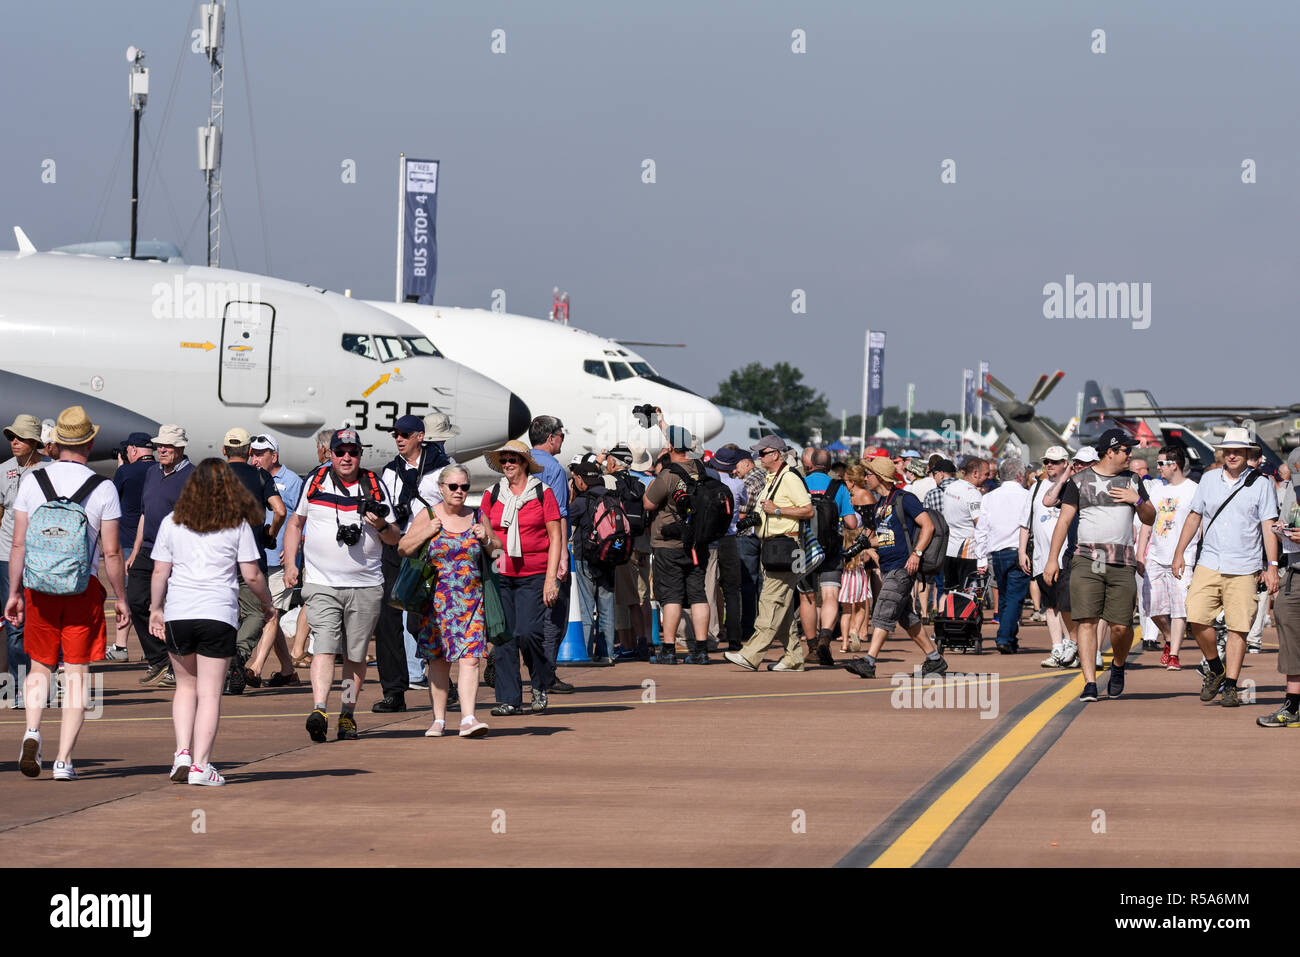 Aviation enthusiasts at the Royal International Air Tattoo, RIAT, RAF Fairford airshow. The largest event of its type in the world. Cotswolds. People Stock Photo